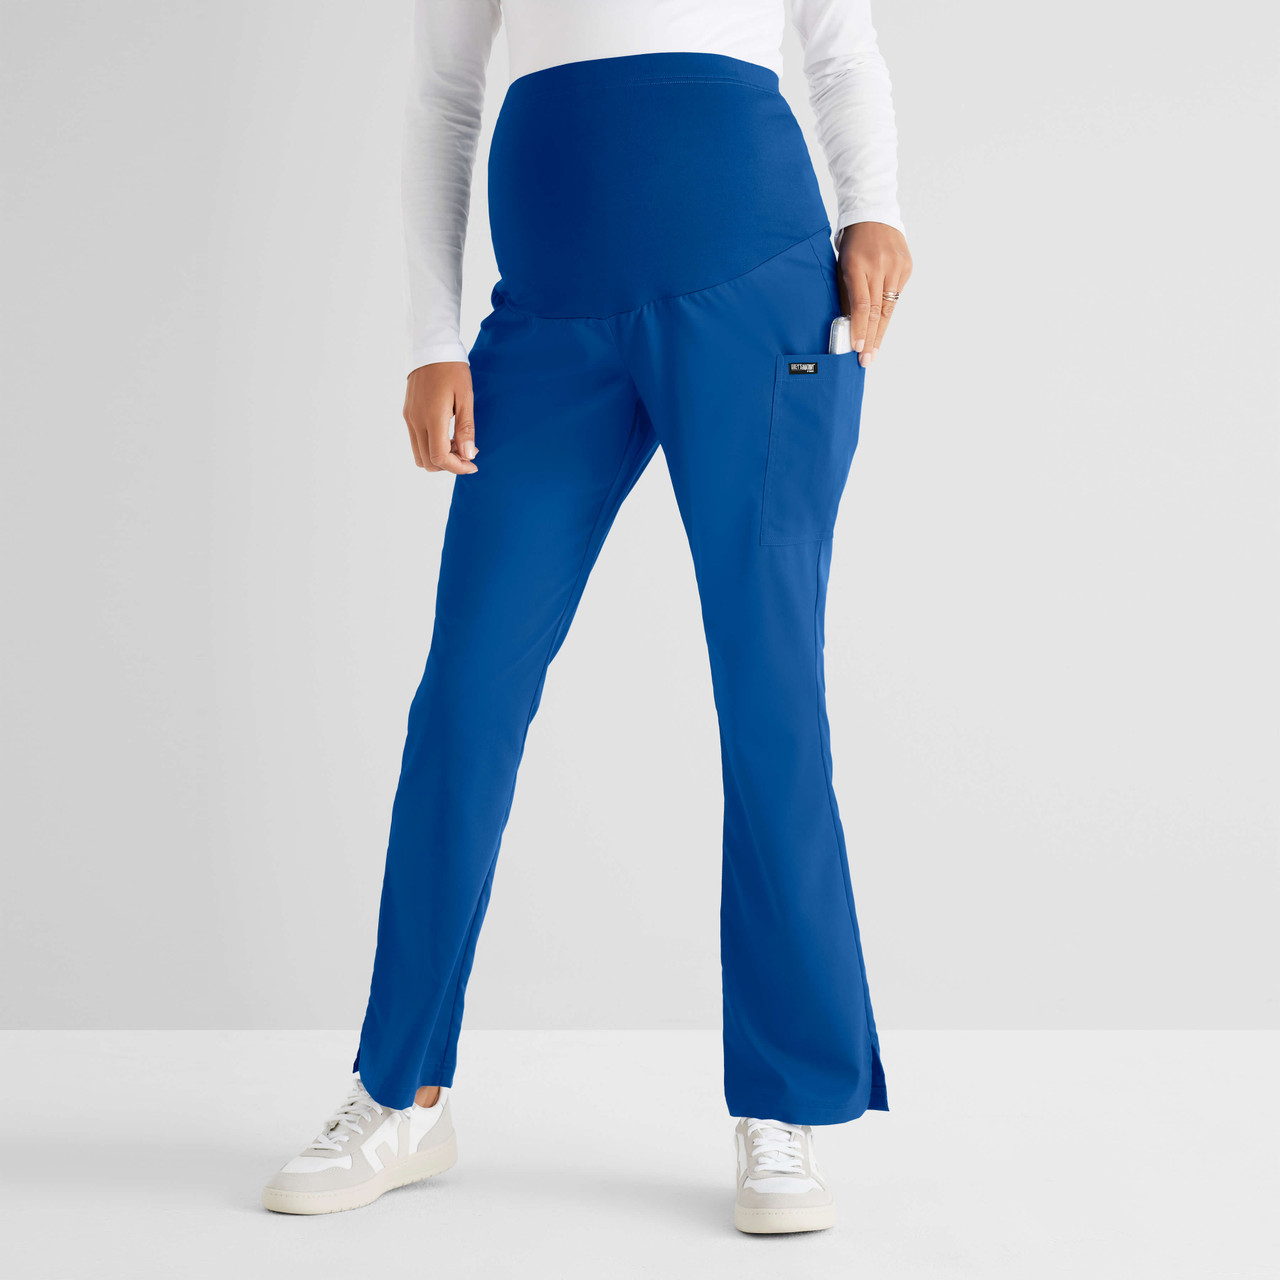 Grey's Anatomy Lilah Cargo Maternity Pant #GRP560 - The Uniform Outlet